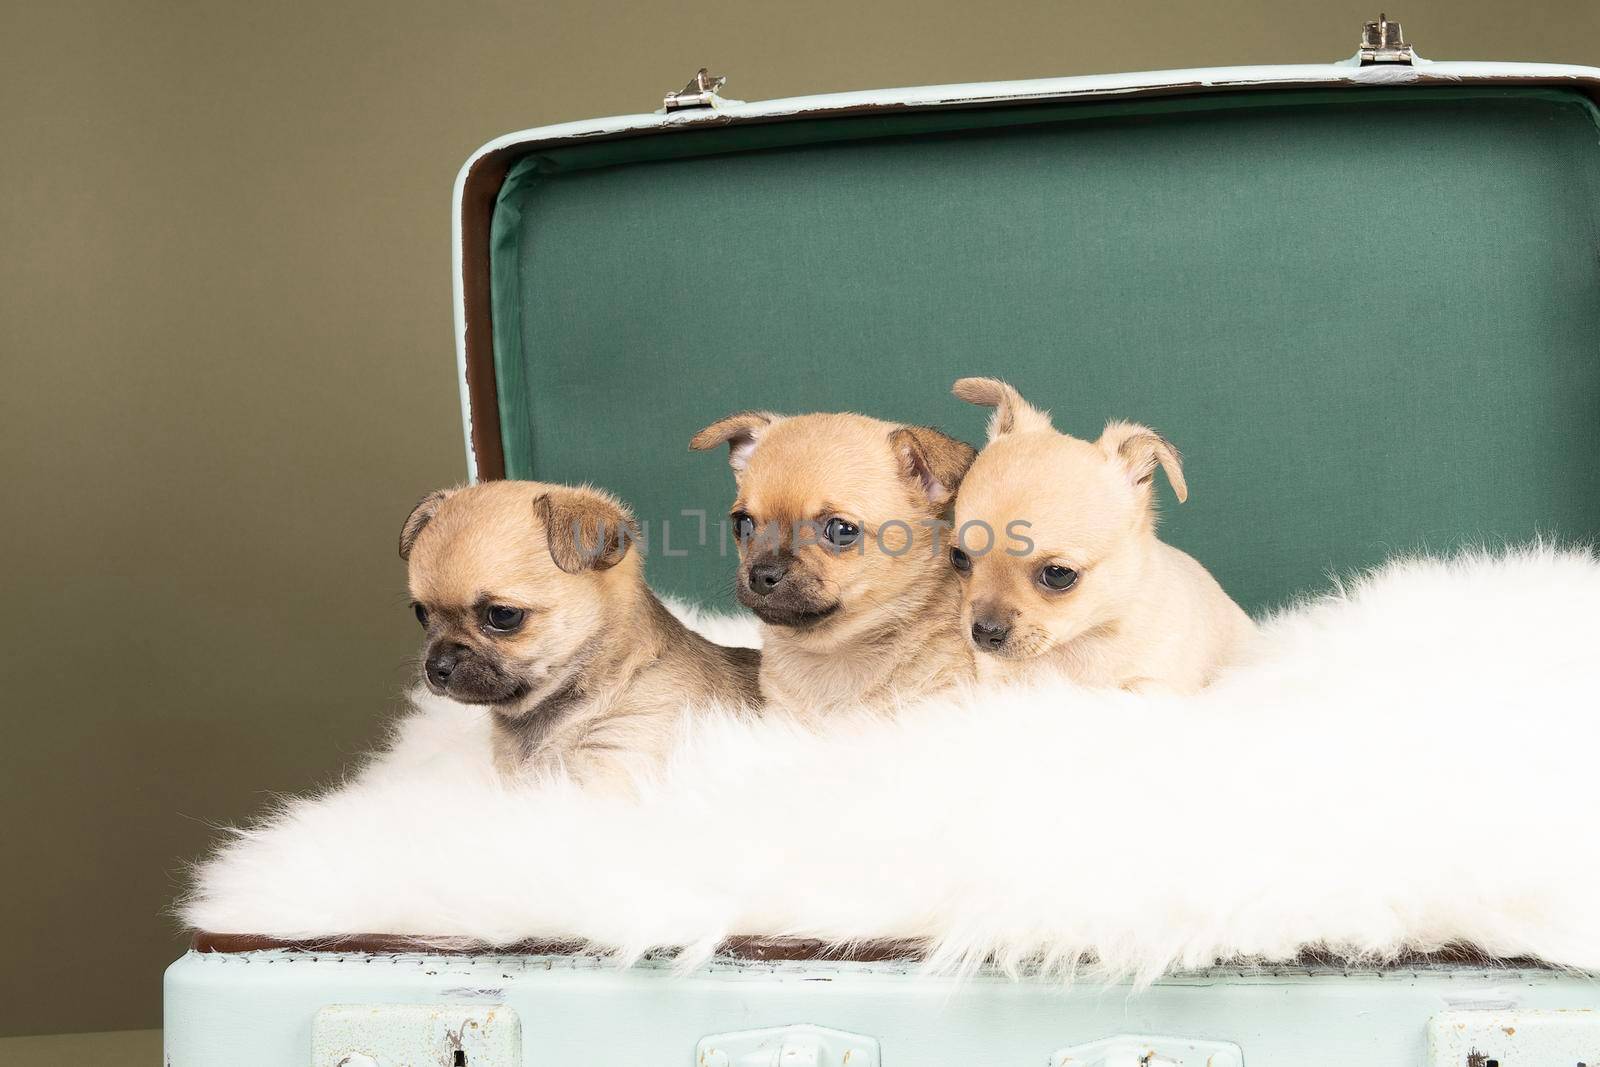 Three cute little Chihuahua puppies on a white fur in a green suitcase with a green background by LeoniekvanderVliet